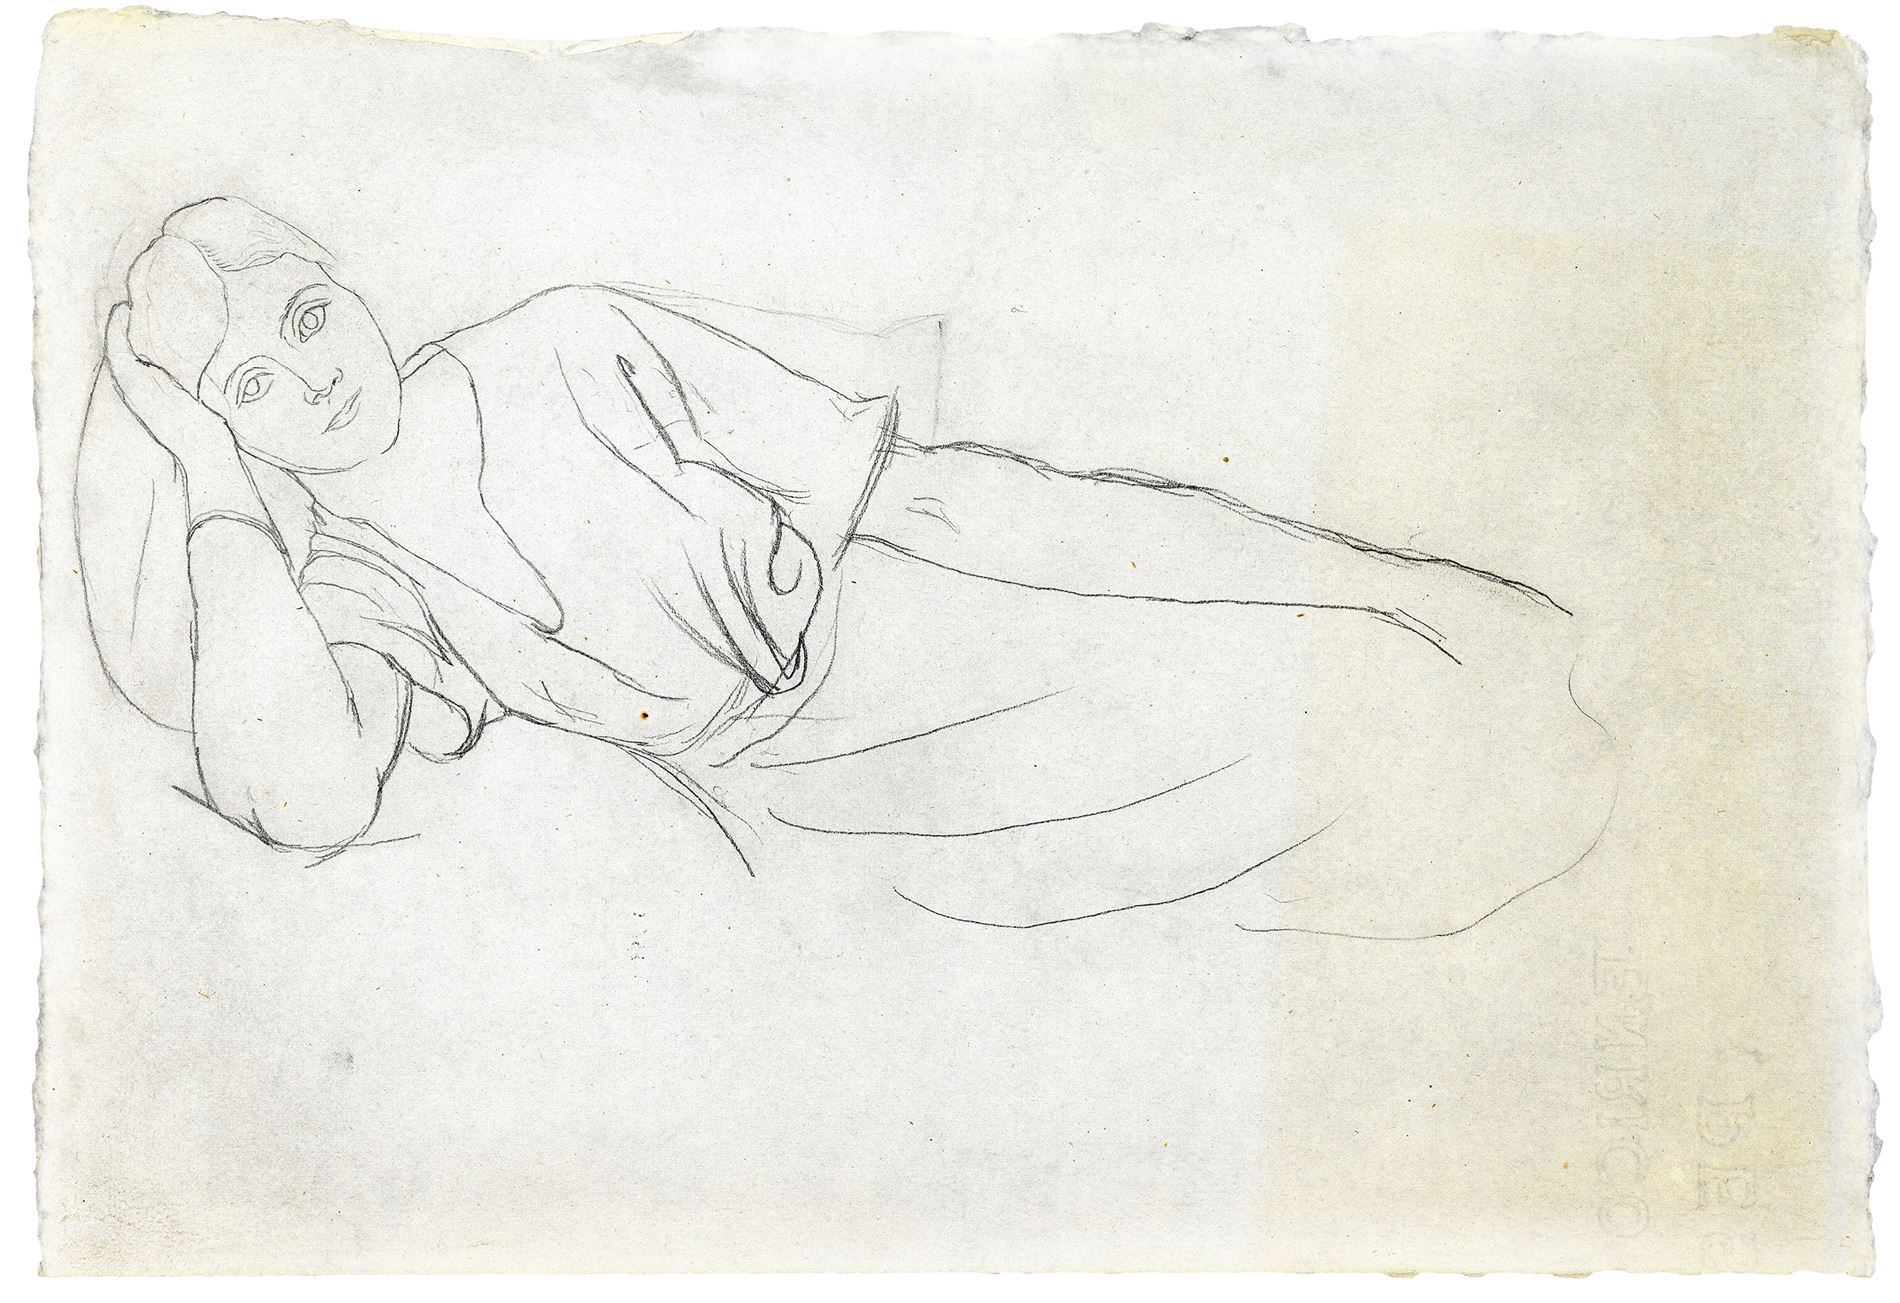 Drawings by Pablo Picasso